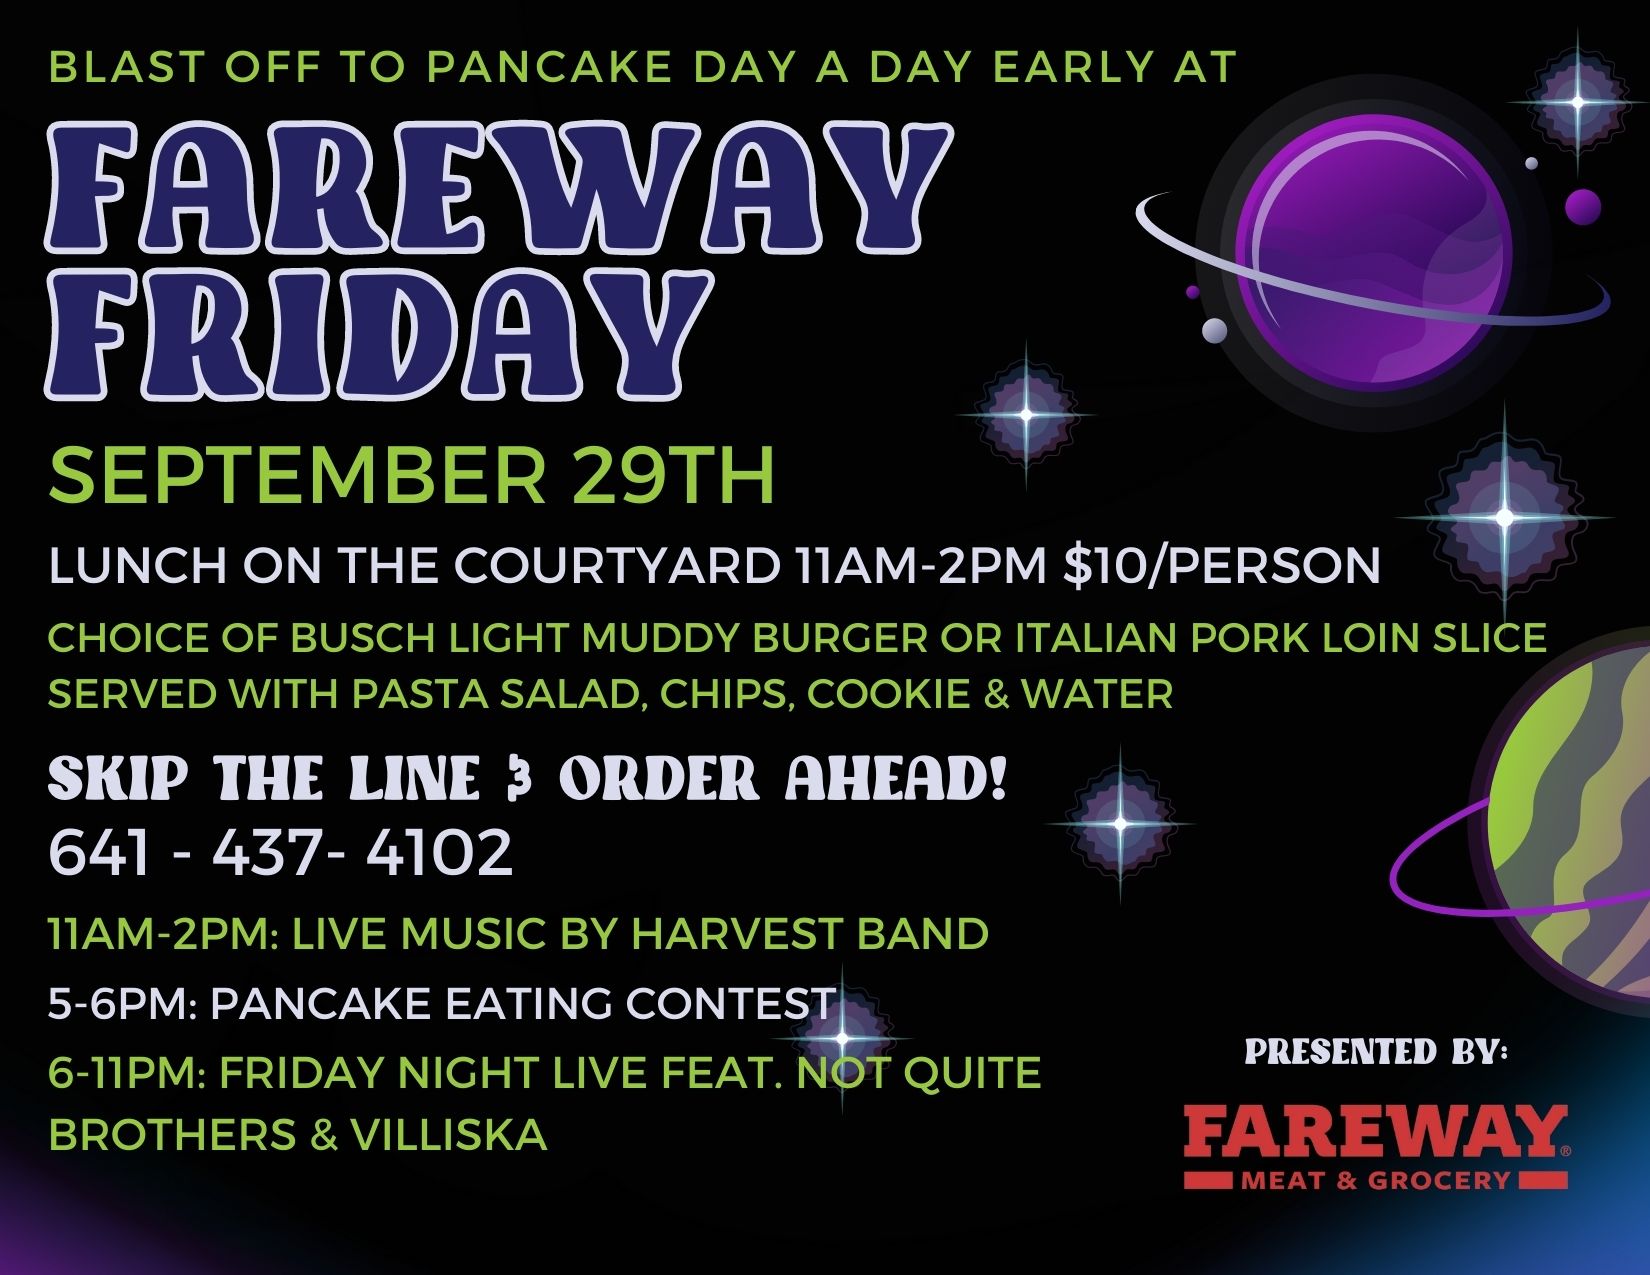 Promotional postcard with Fareway Friday event details